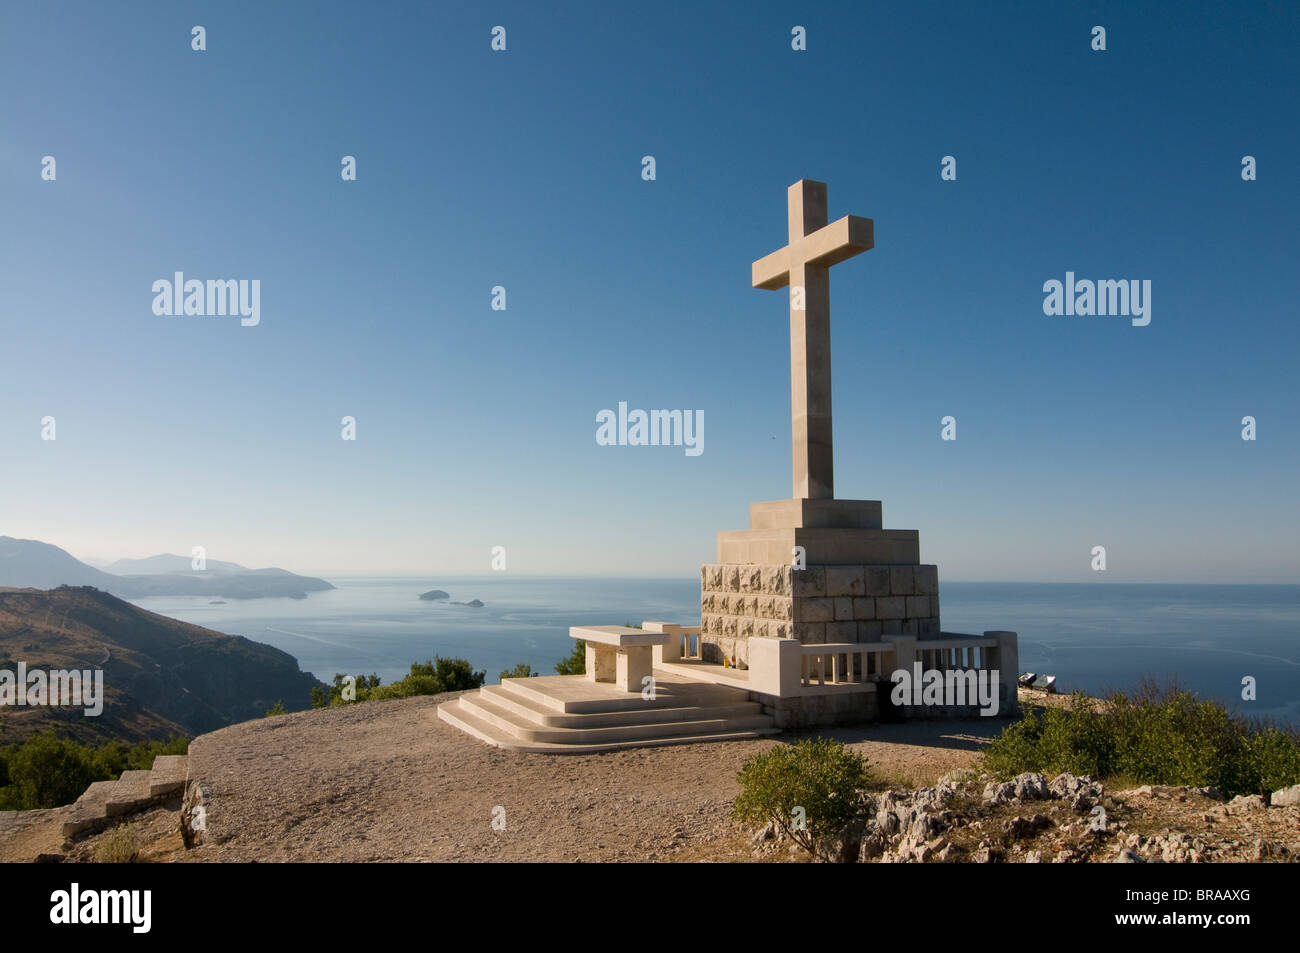 Huge Christian cross on top of the mountain above the old town of Dubrovnik, Croatia, Europe Stock Photo